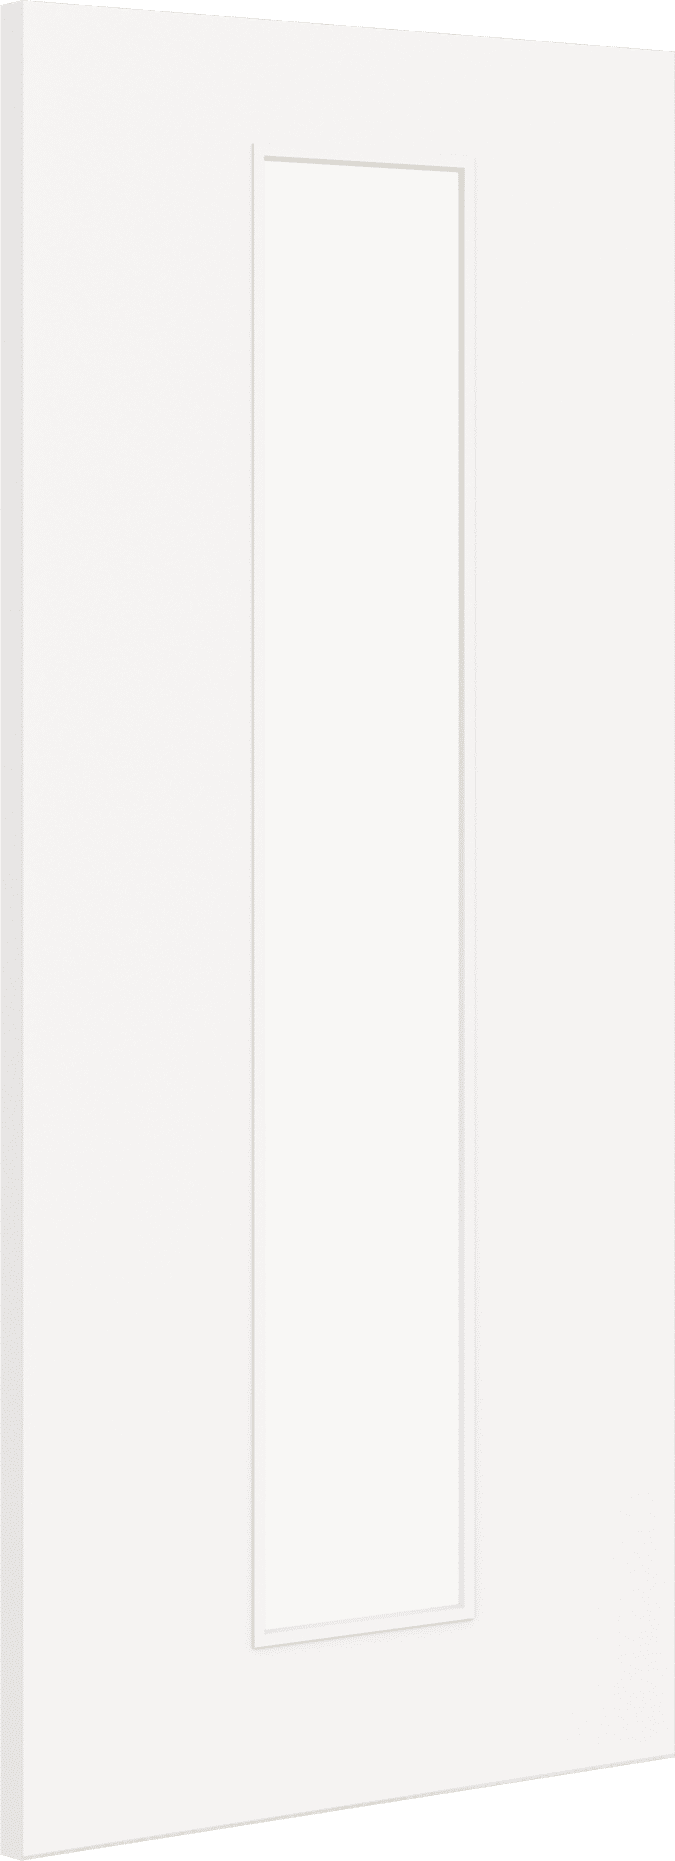 2040mm x 626mm x 44mm Architectural Paint Grade White 10 Frosted Glazed Fire Door Blank